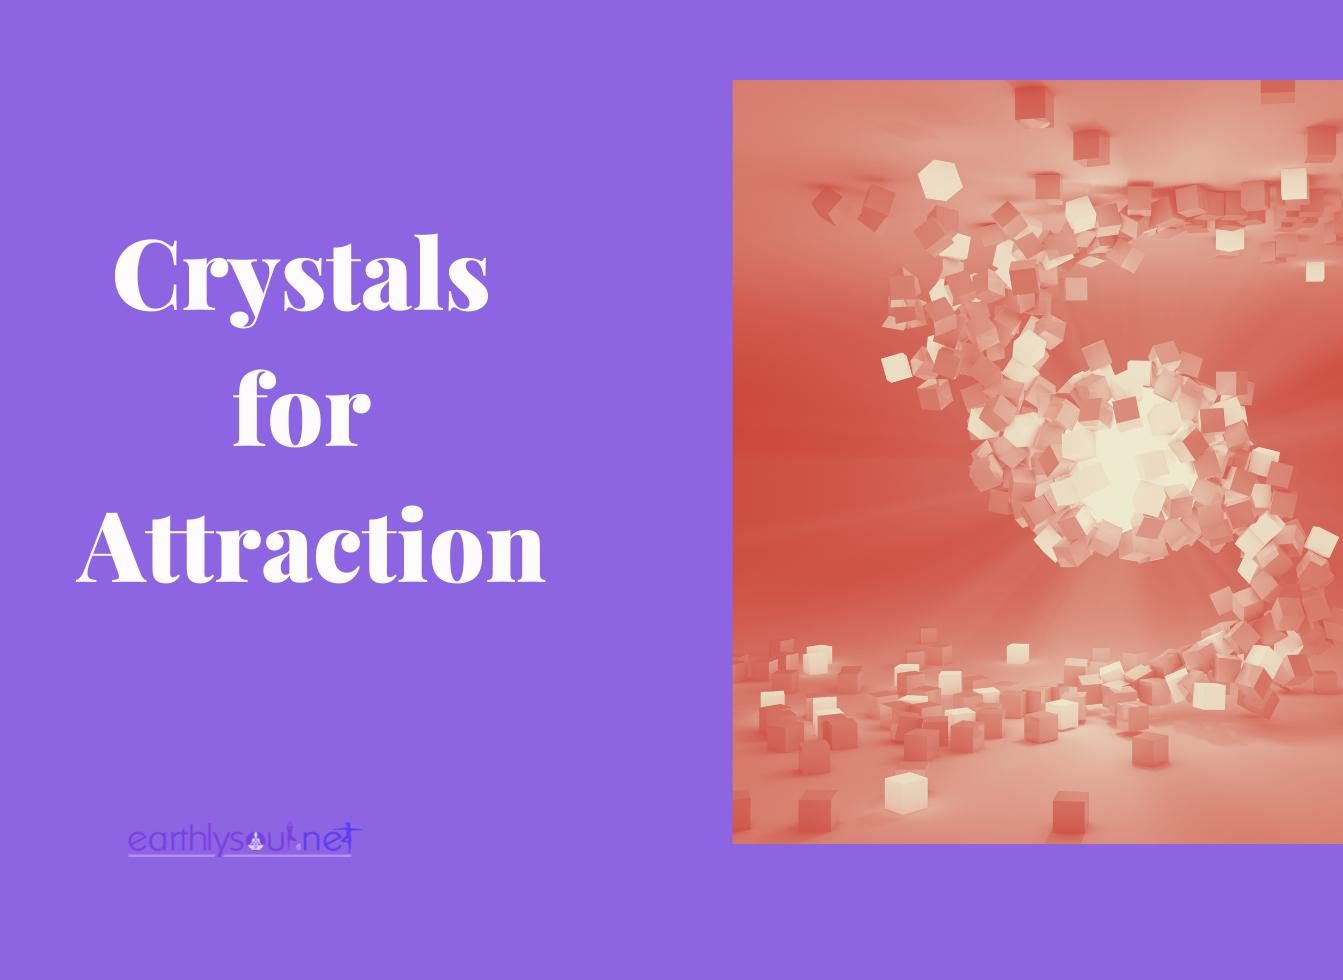 Crystals for attraction featured image